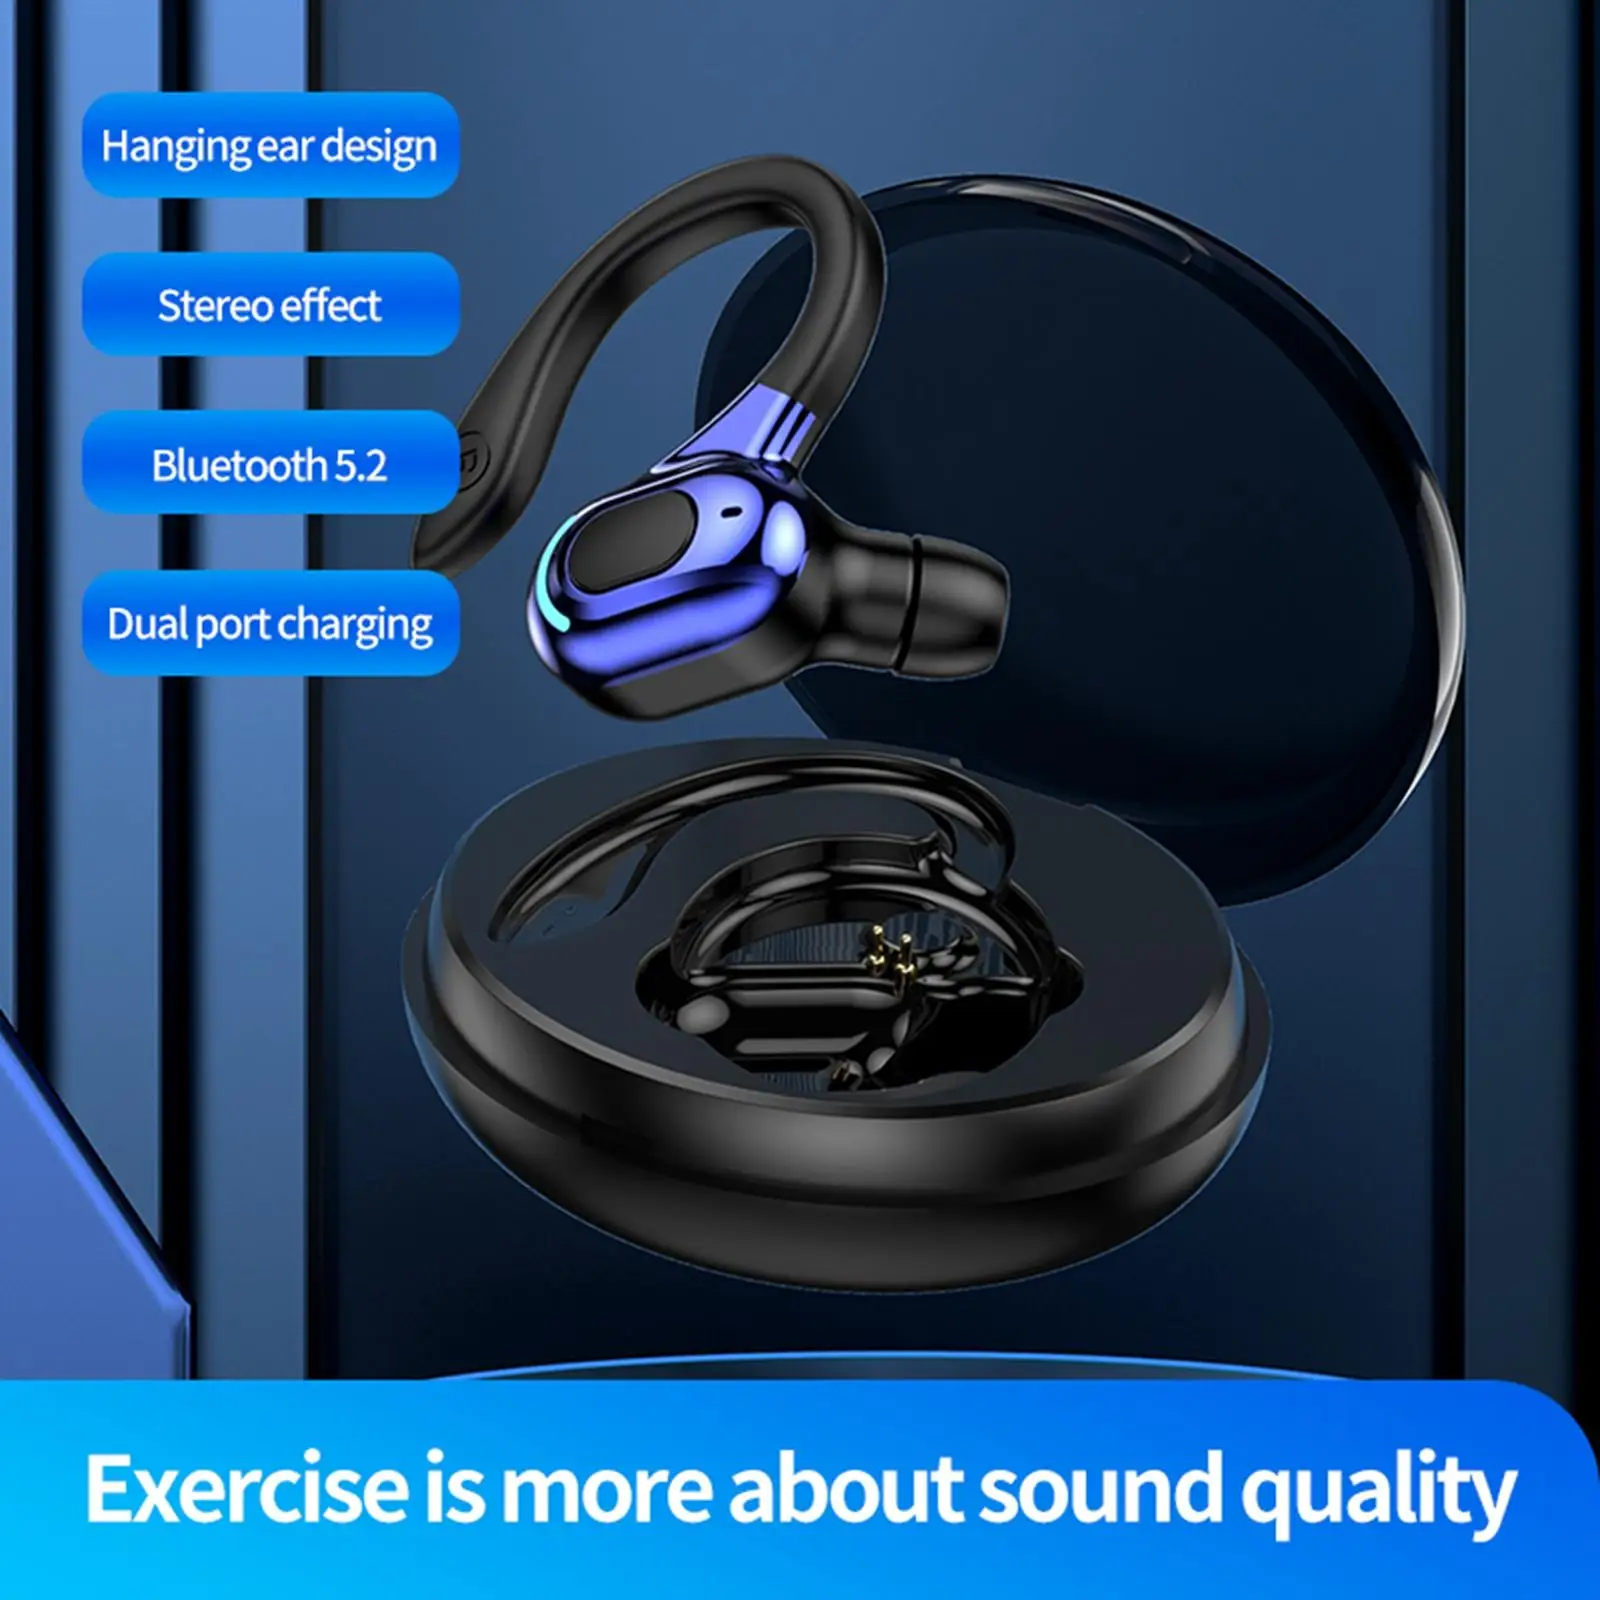 Sports Headset Touch Enabled Low Latency Sweatproof IPX4 Waterproof HiFi Headphones Earpiece for Running Driving Office Workout